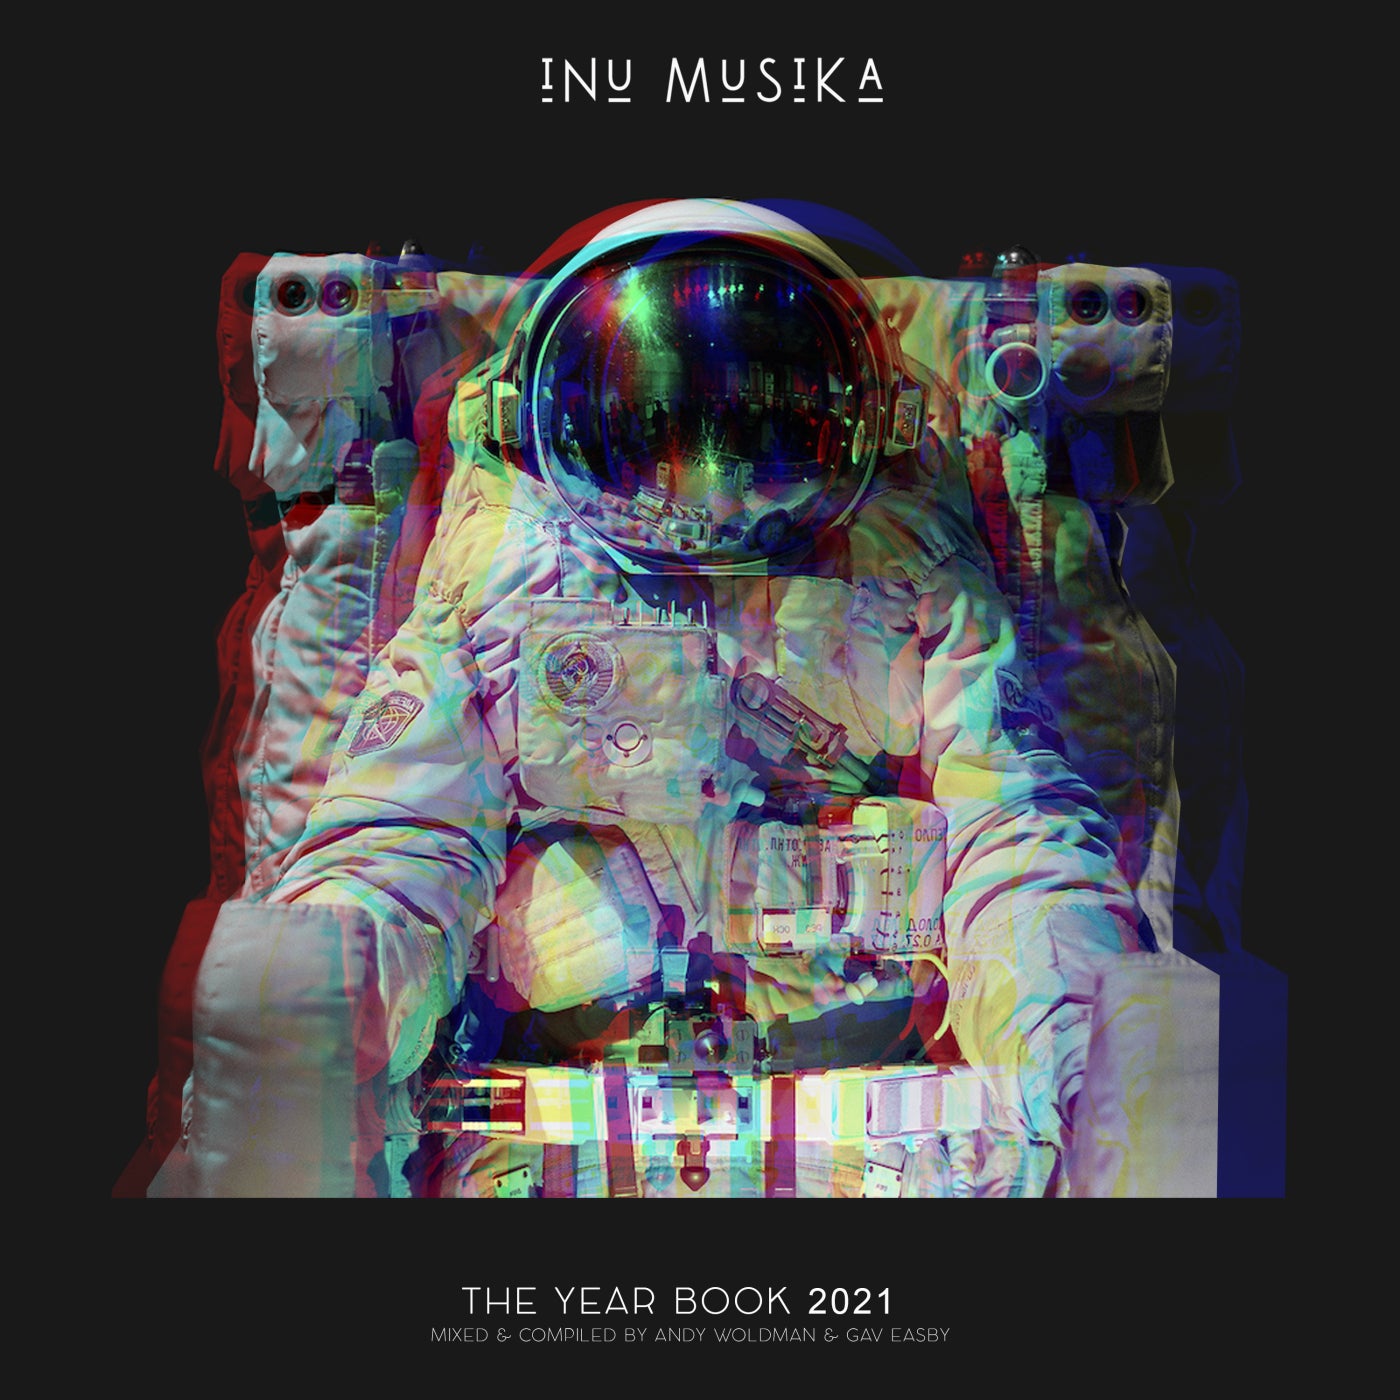 The Yearbook 2021 - CD1 (Compiled by Andy Woldman)